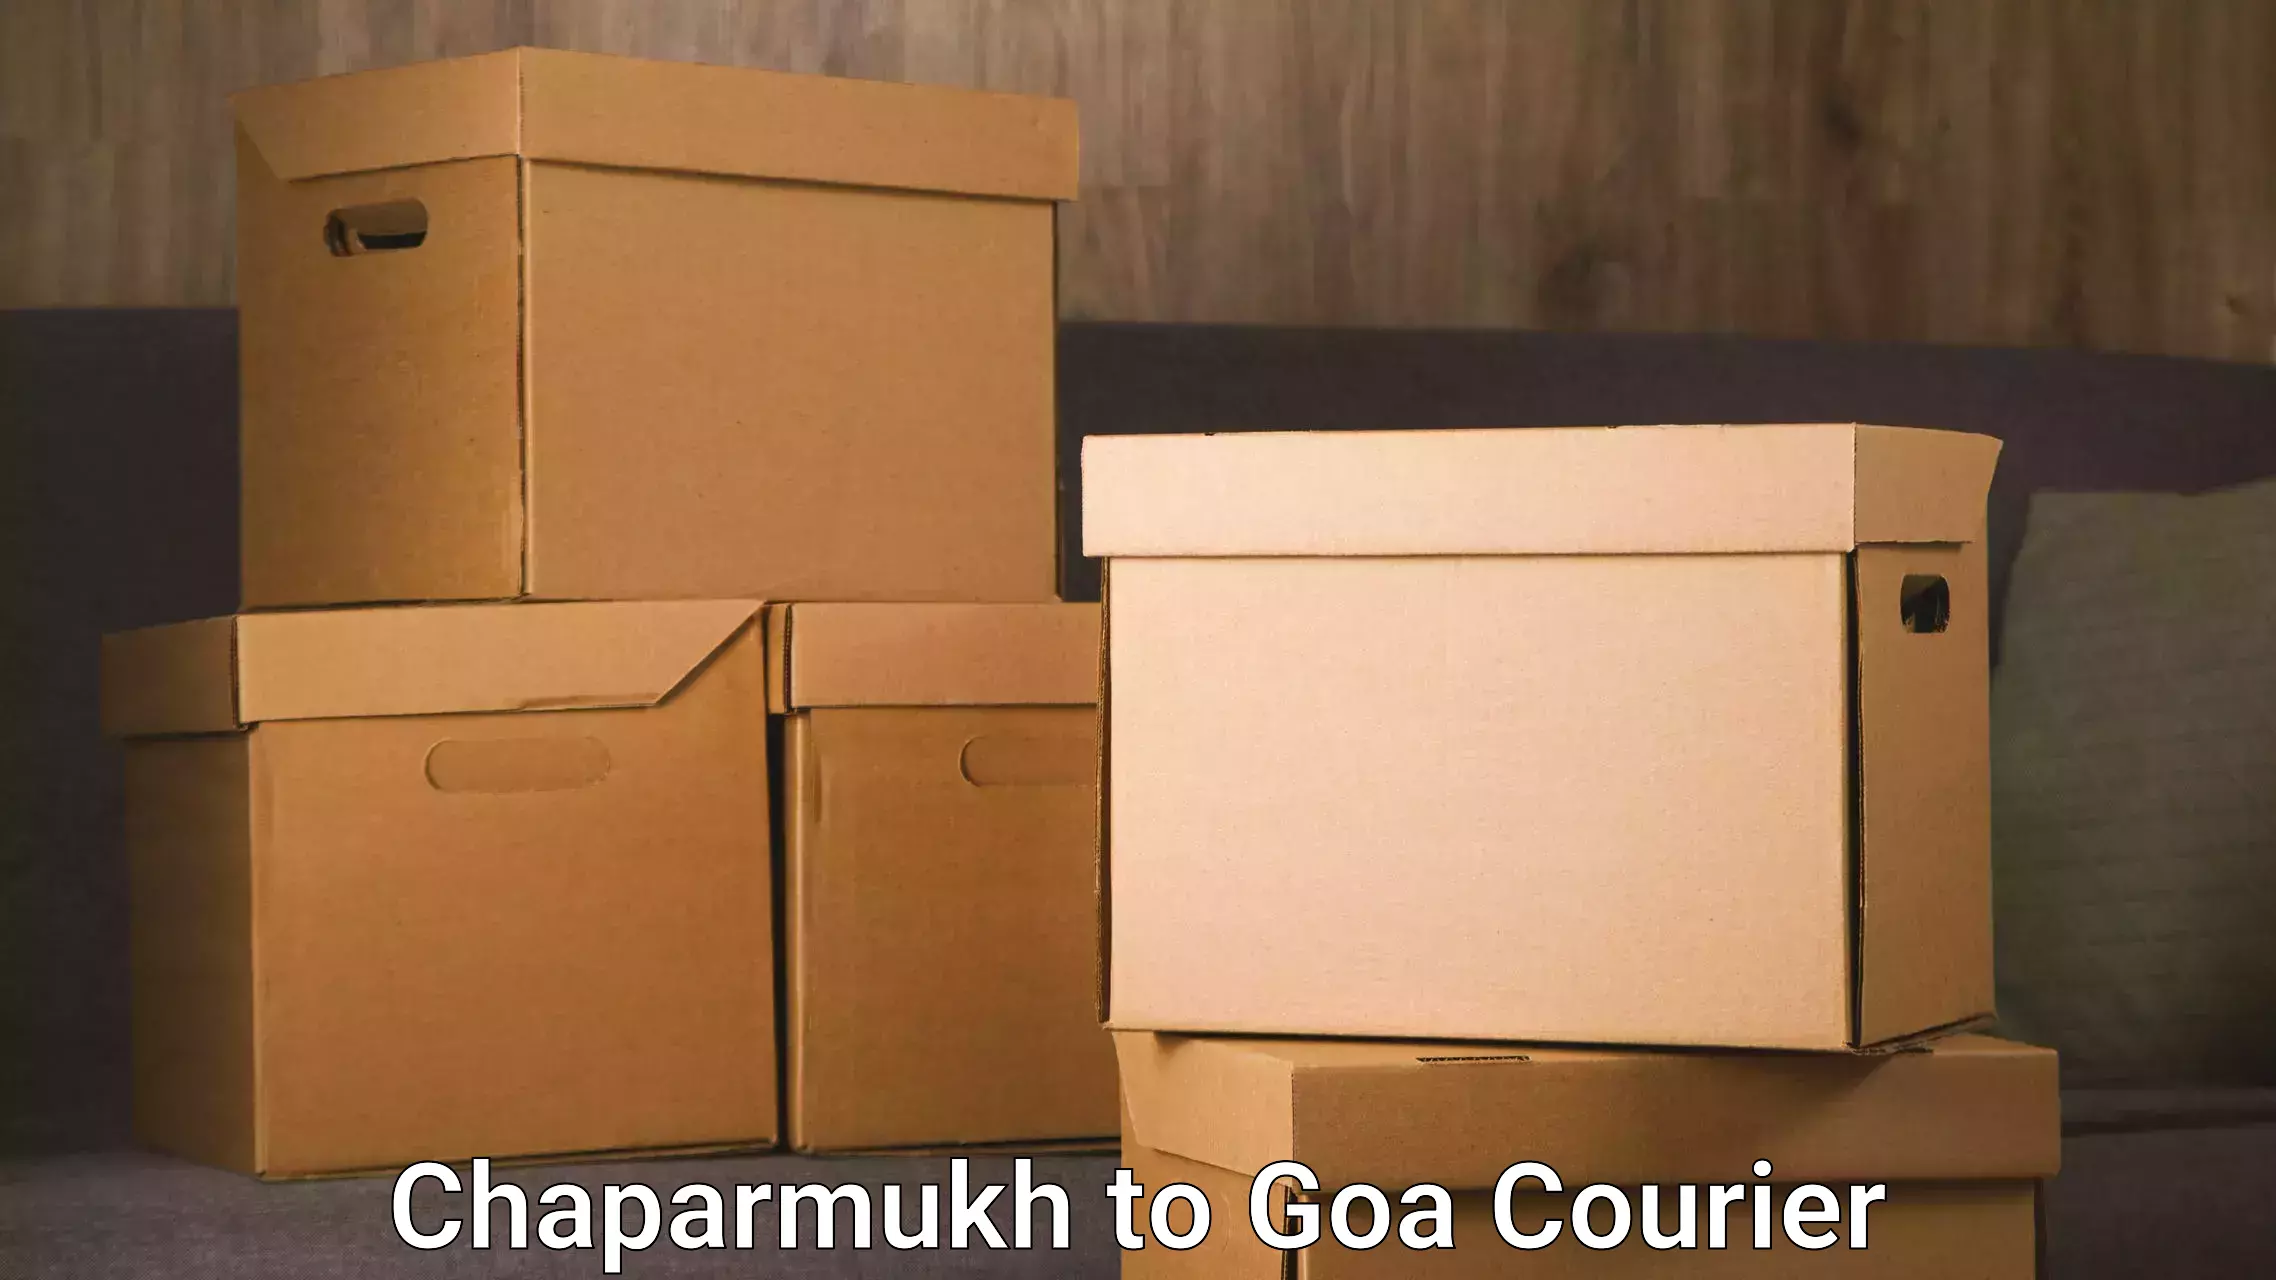 Courier service partnerships Chaparmukh to Goa